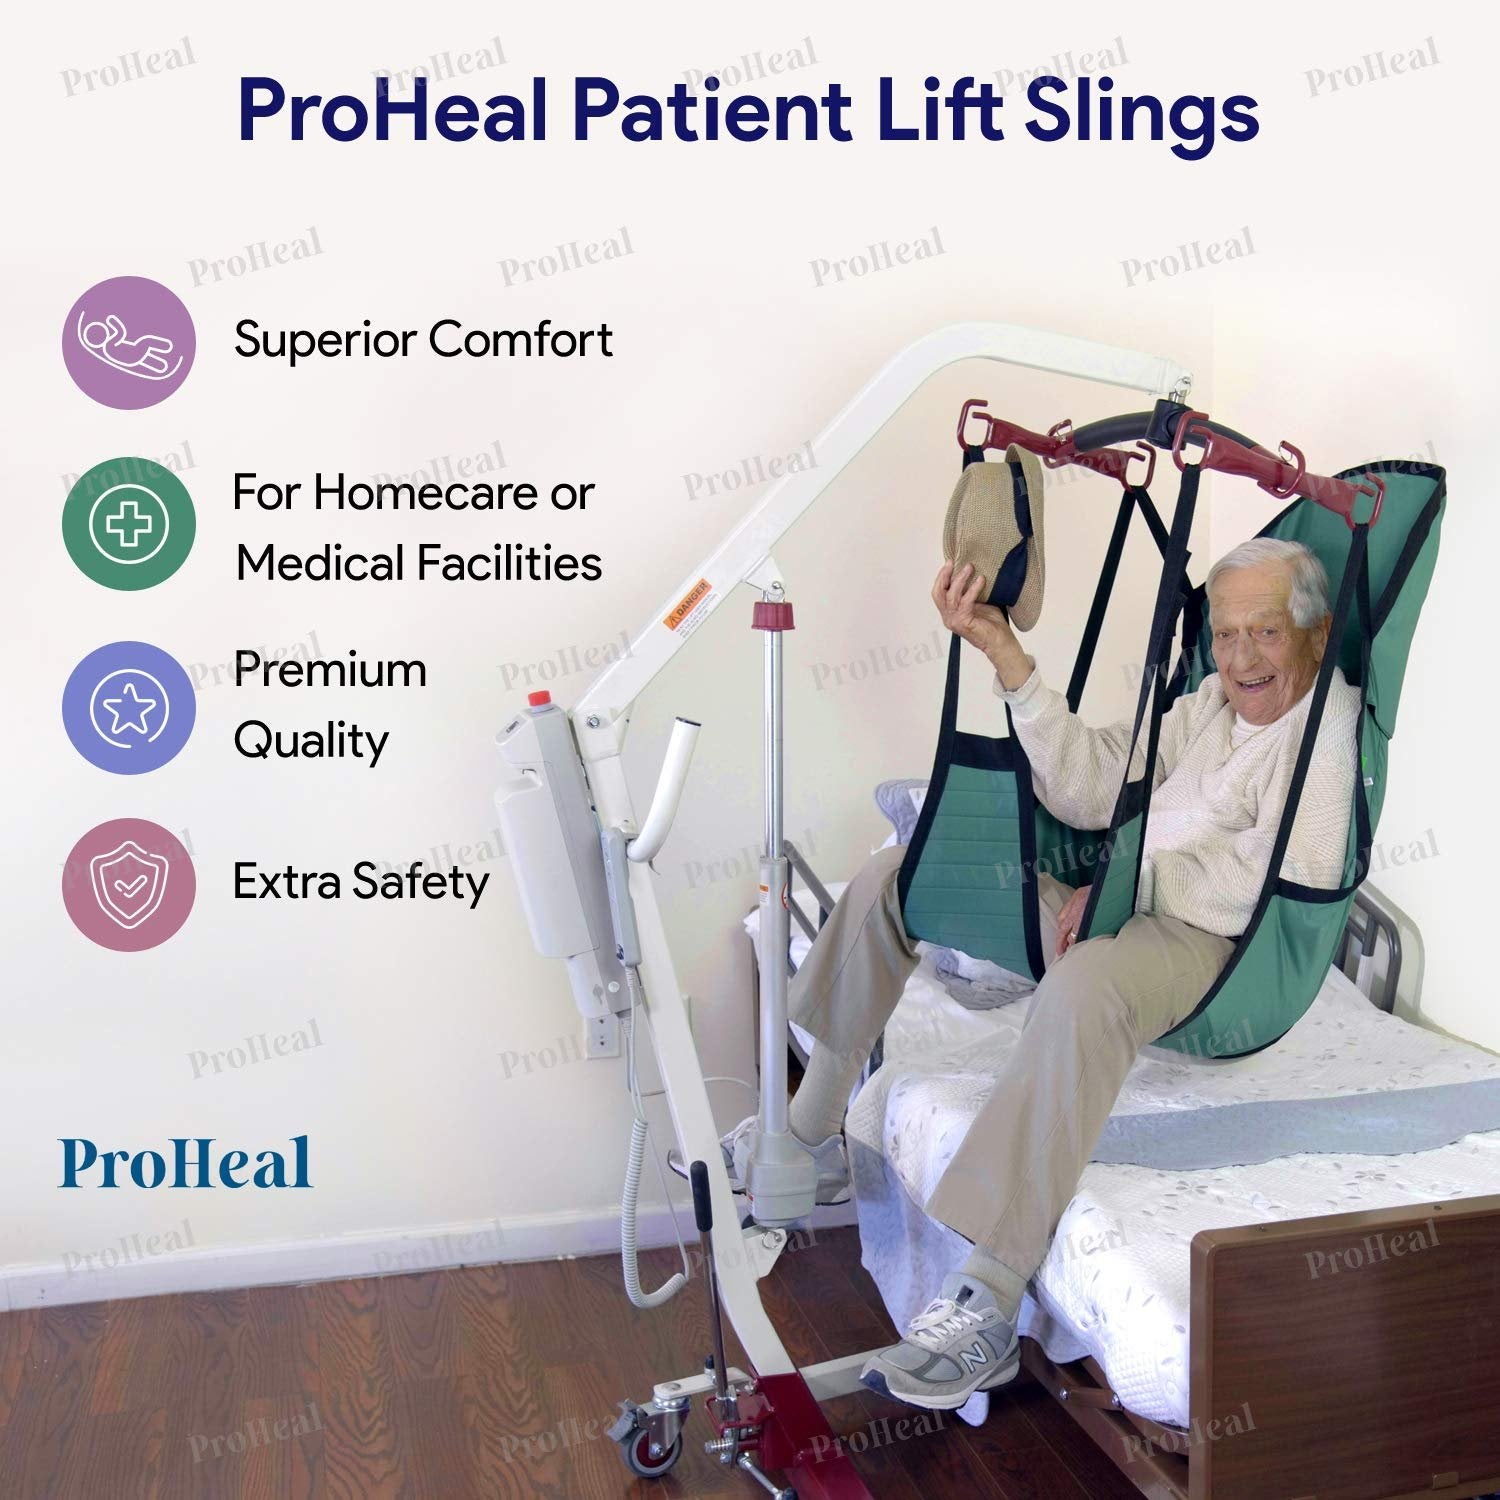 ProHeal Universal Full Body Lift Sling, Large, 55"L x 43" - Solid Fabric Polyester Slings for Patient Lifts - Compatible with Hoyer, Invacare, McKesson, Drive, Lumex, Medline, Joerns and More